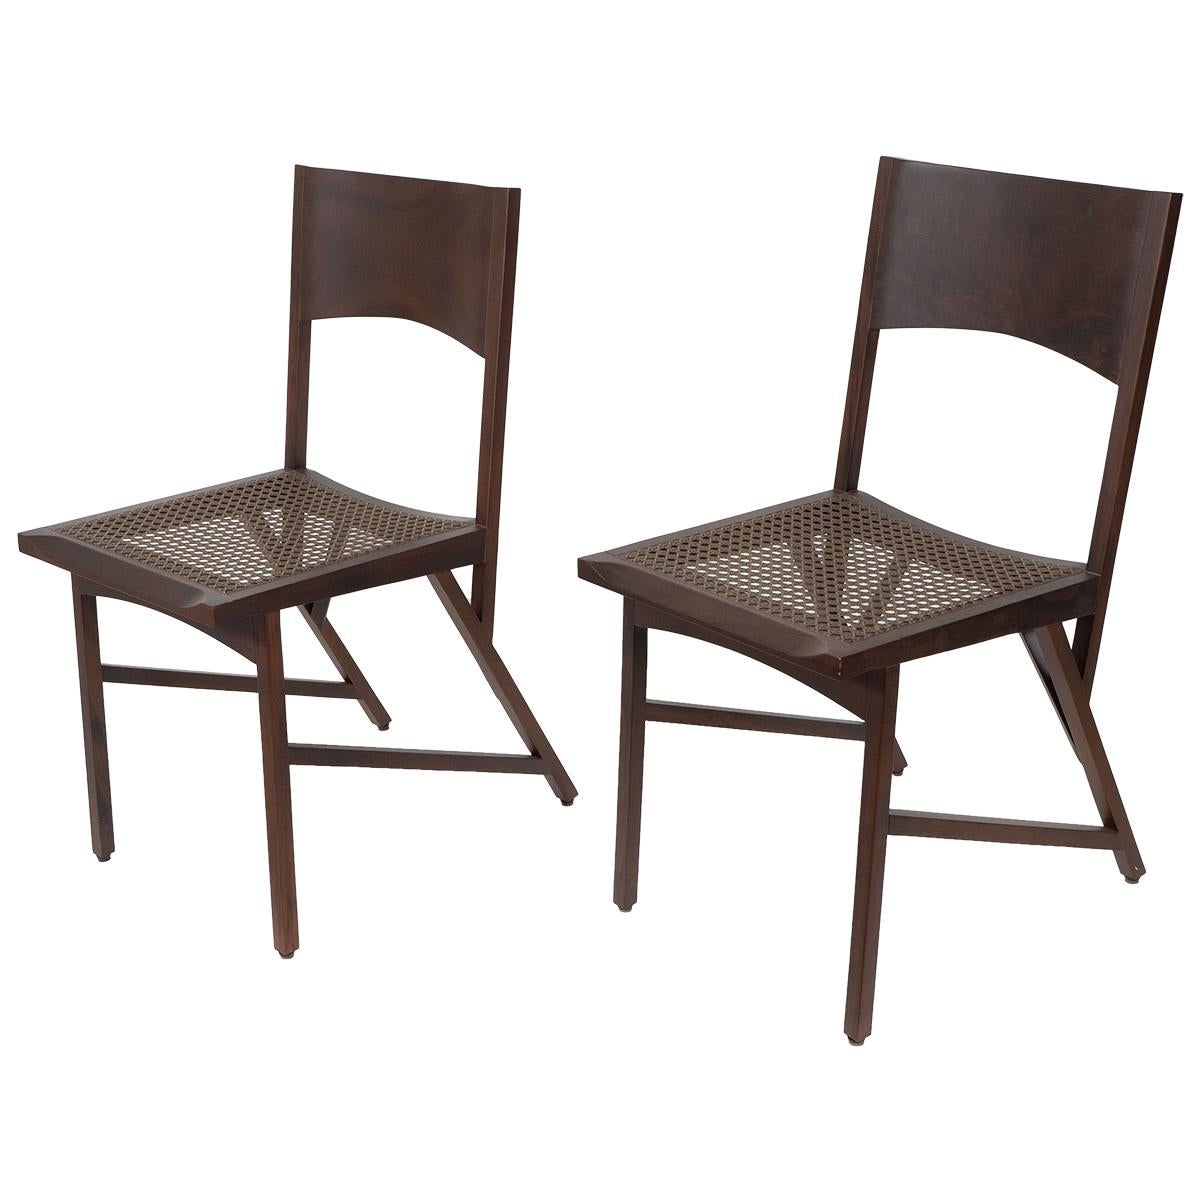 Pair of limited edition wicker and rare Brazilian wood chairs by Paolo Alves.